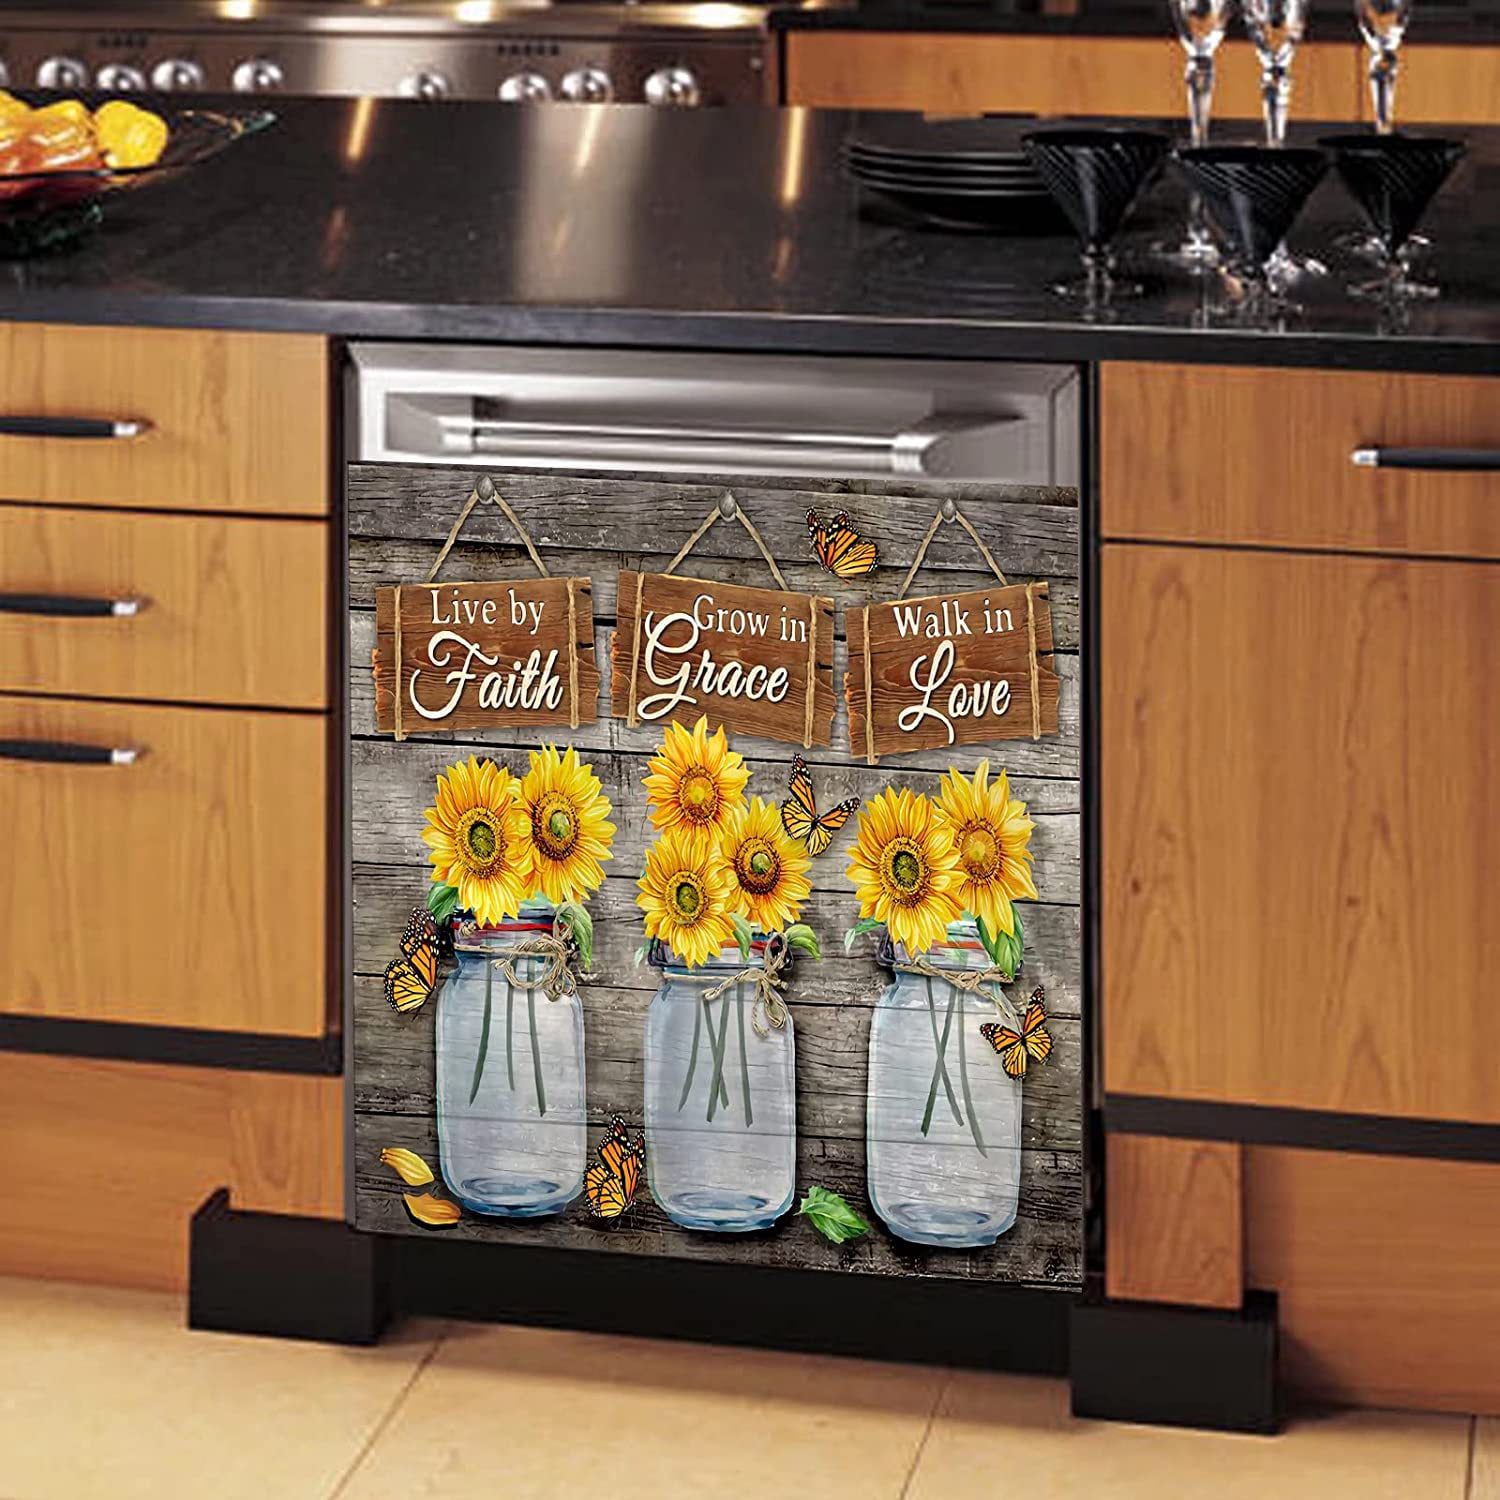  Dishwasher Magnetic Cover, Fall Sunflowers Flowers Khaki Plaid  Magnet Dishwasher Door Cover Refrigerator Decal Panel Kitchen Appliances  Decor Stickers, Easy Clean, 23Wx26H